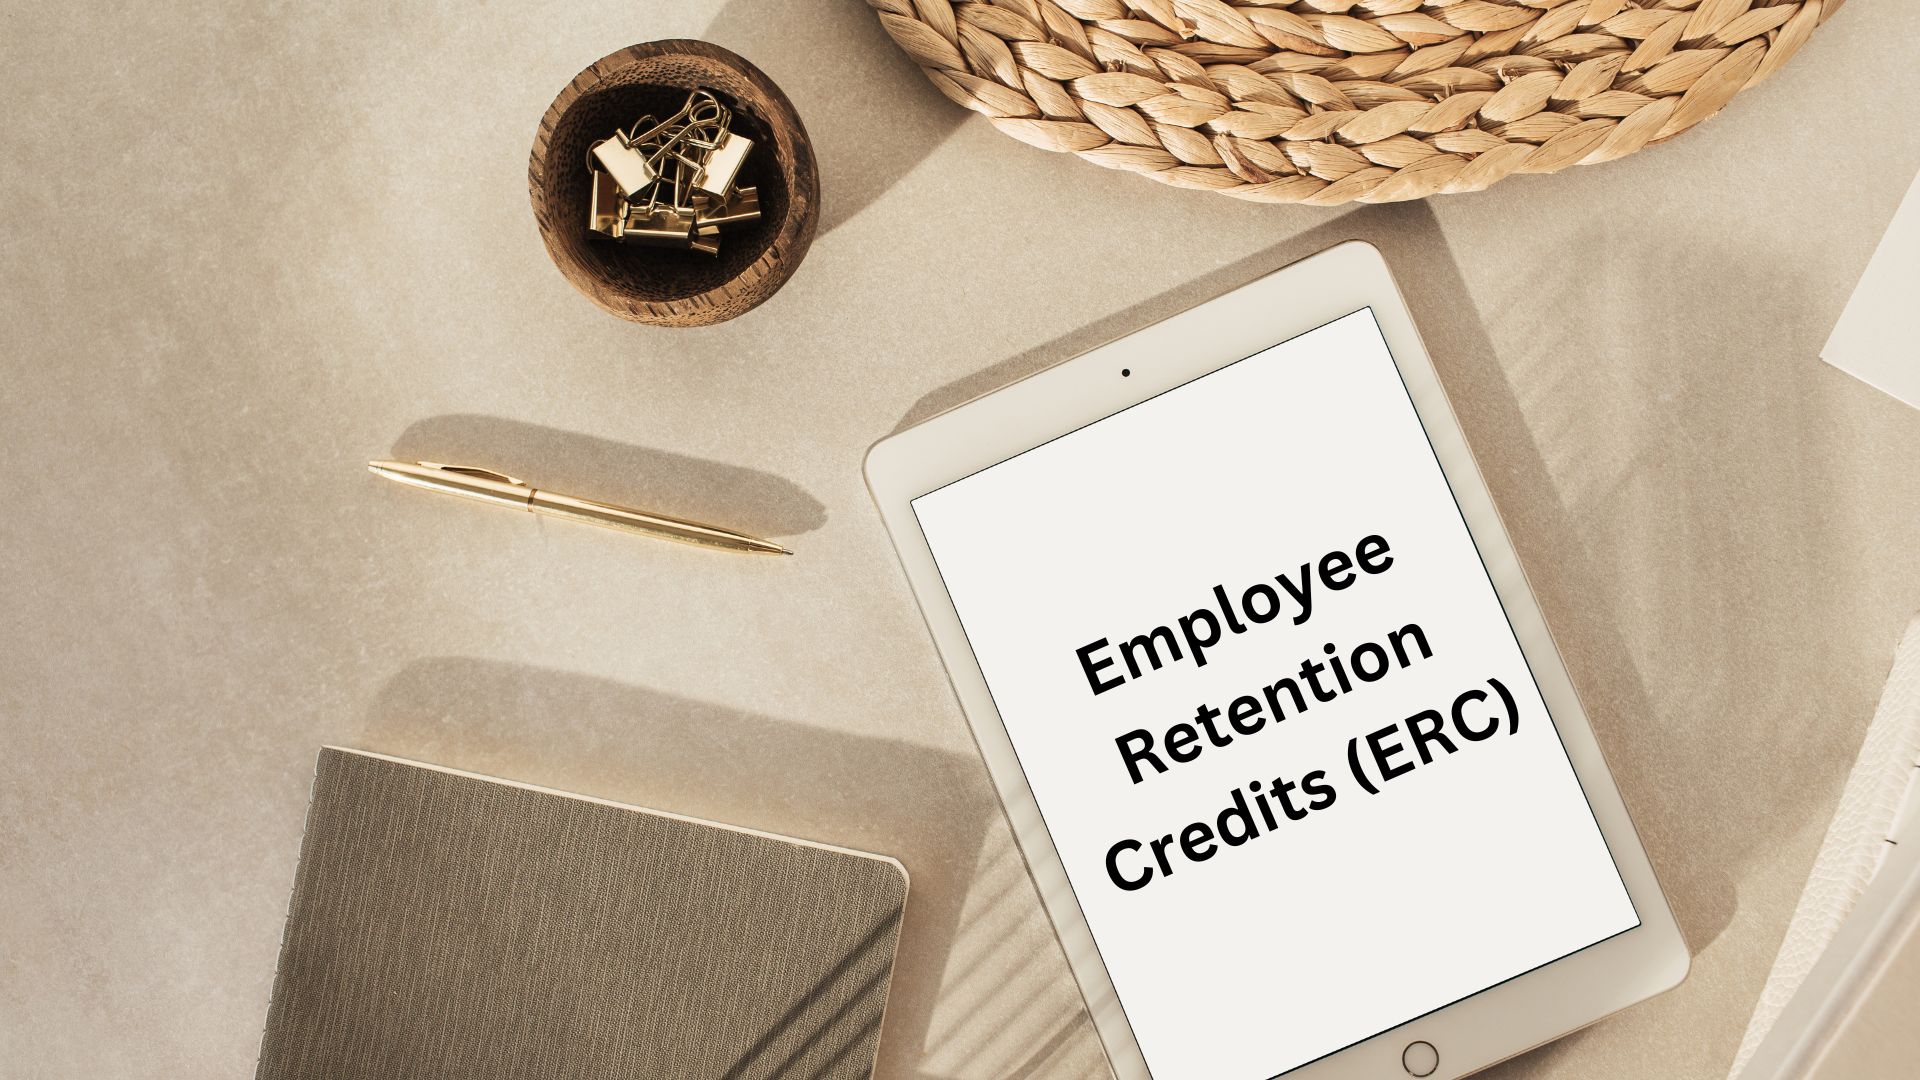 Beware of misleading ERC refund info—IRS cracking down on ERC fraud